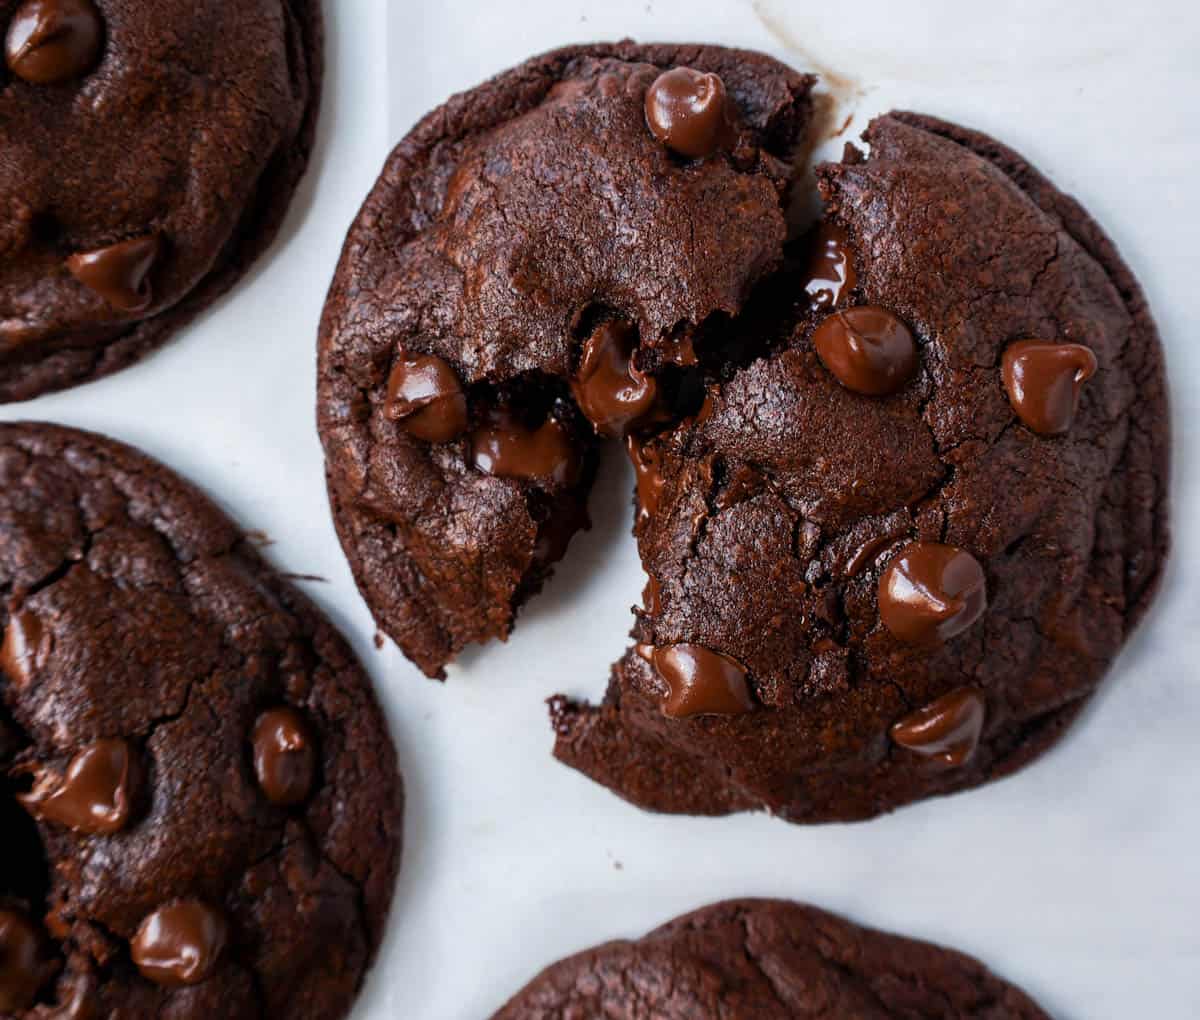 Soft, chewy, fudge-like Chocolate Chocolate Chip Cookies are made with two types of chocolate -- dutch cocoa and semi-sweet chocolate. This is the best double chocolate chip cookie recipe! These rich, decadent double chocolate cookies are for all of my chocolate lovers!